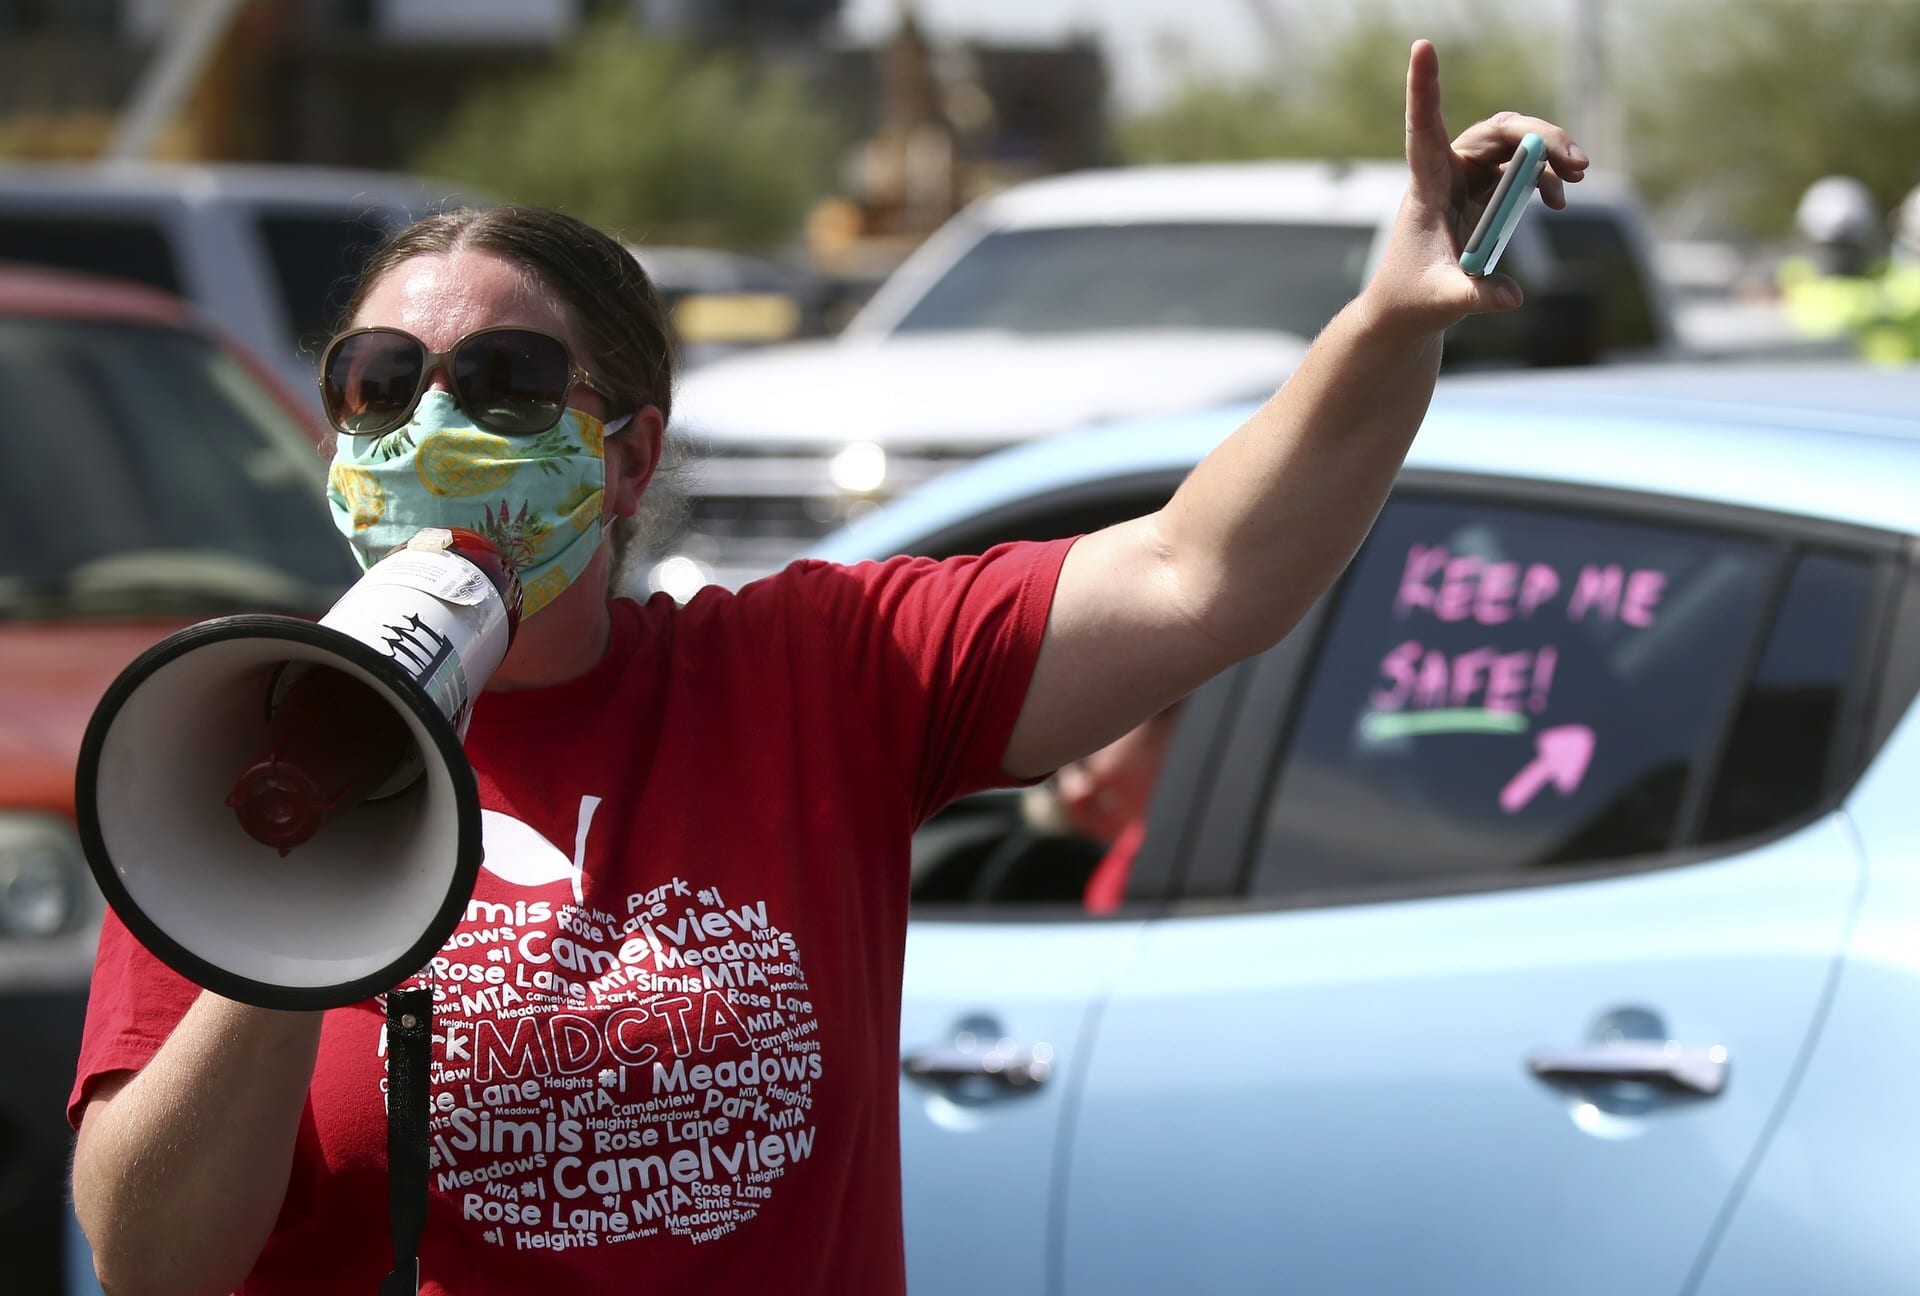 A woman holding a megaphone protests at a teacher strike in Arizona.